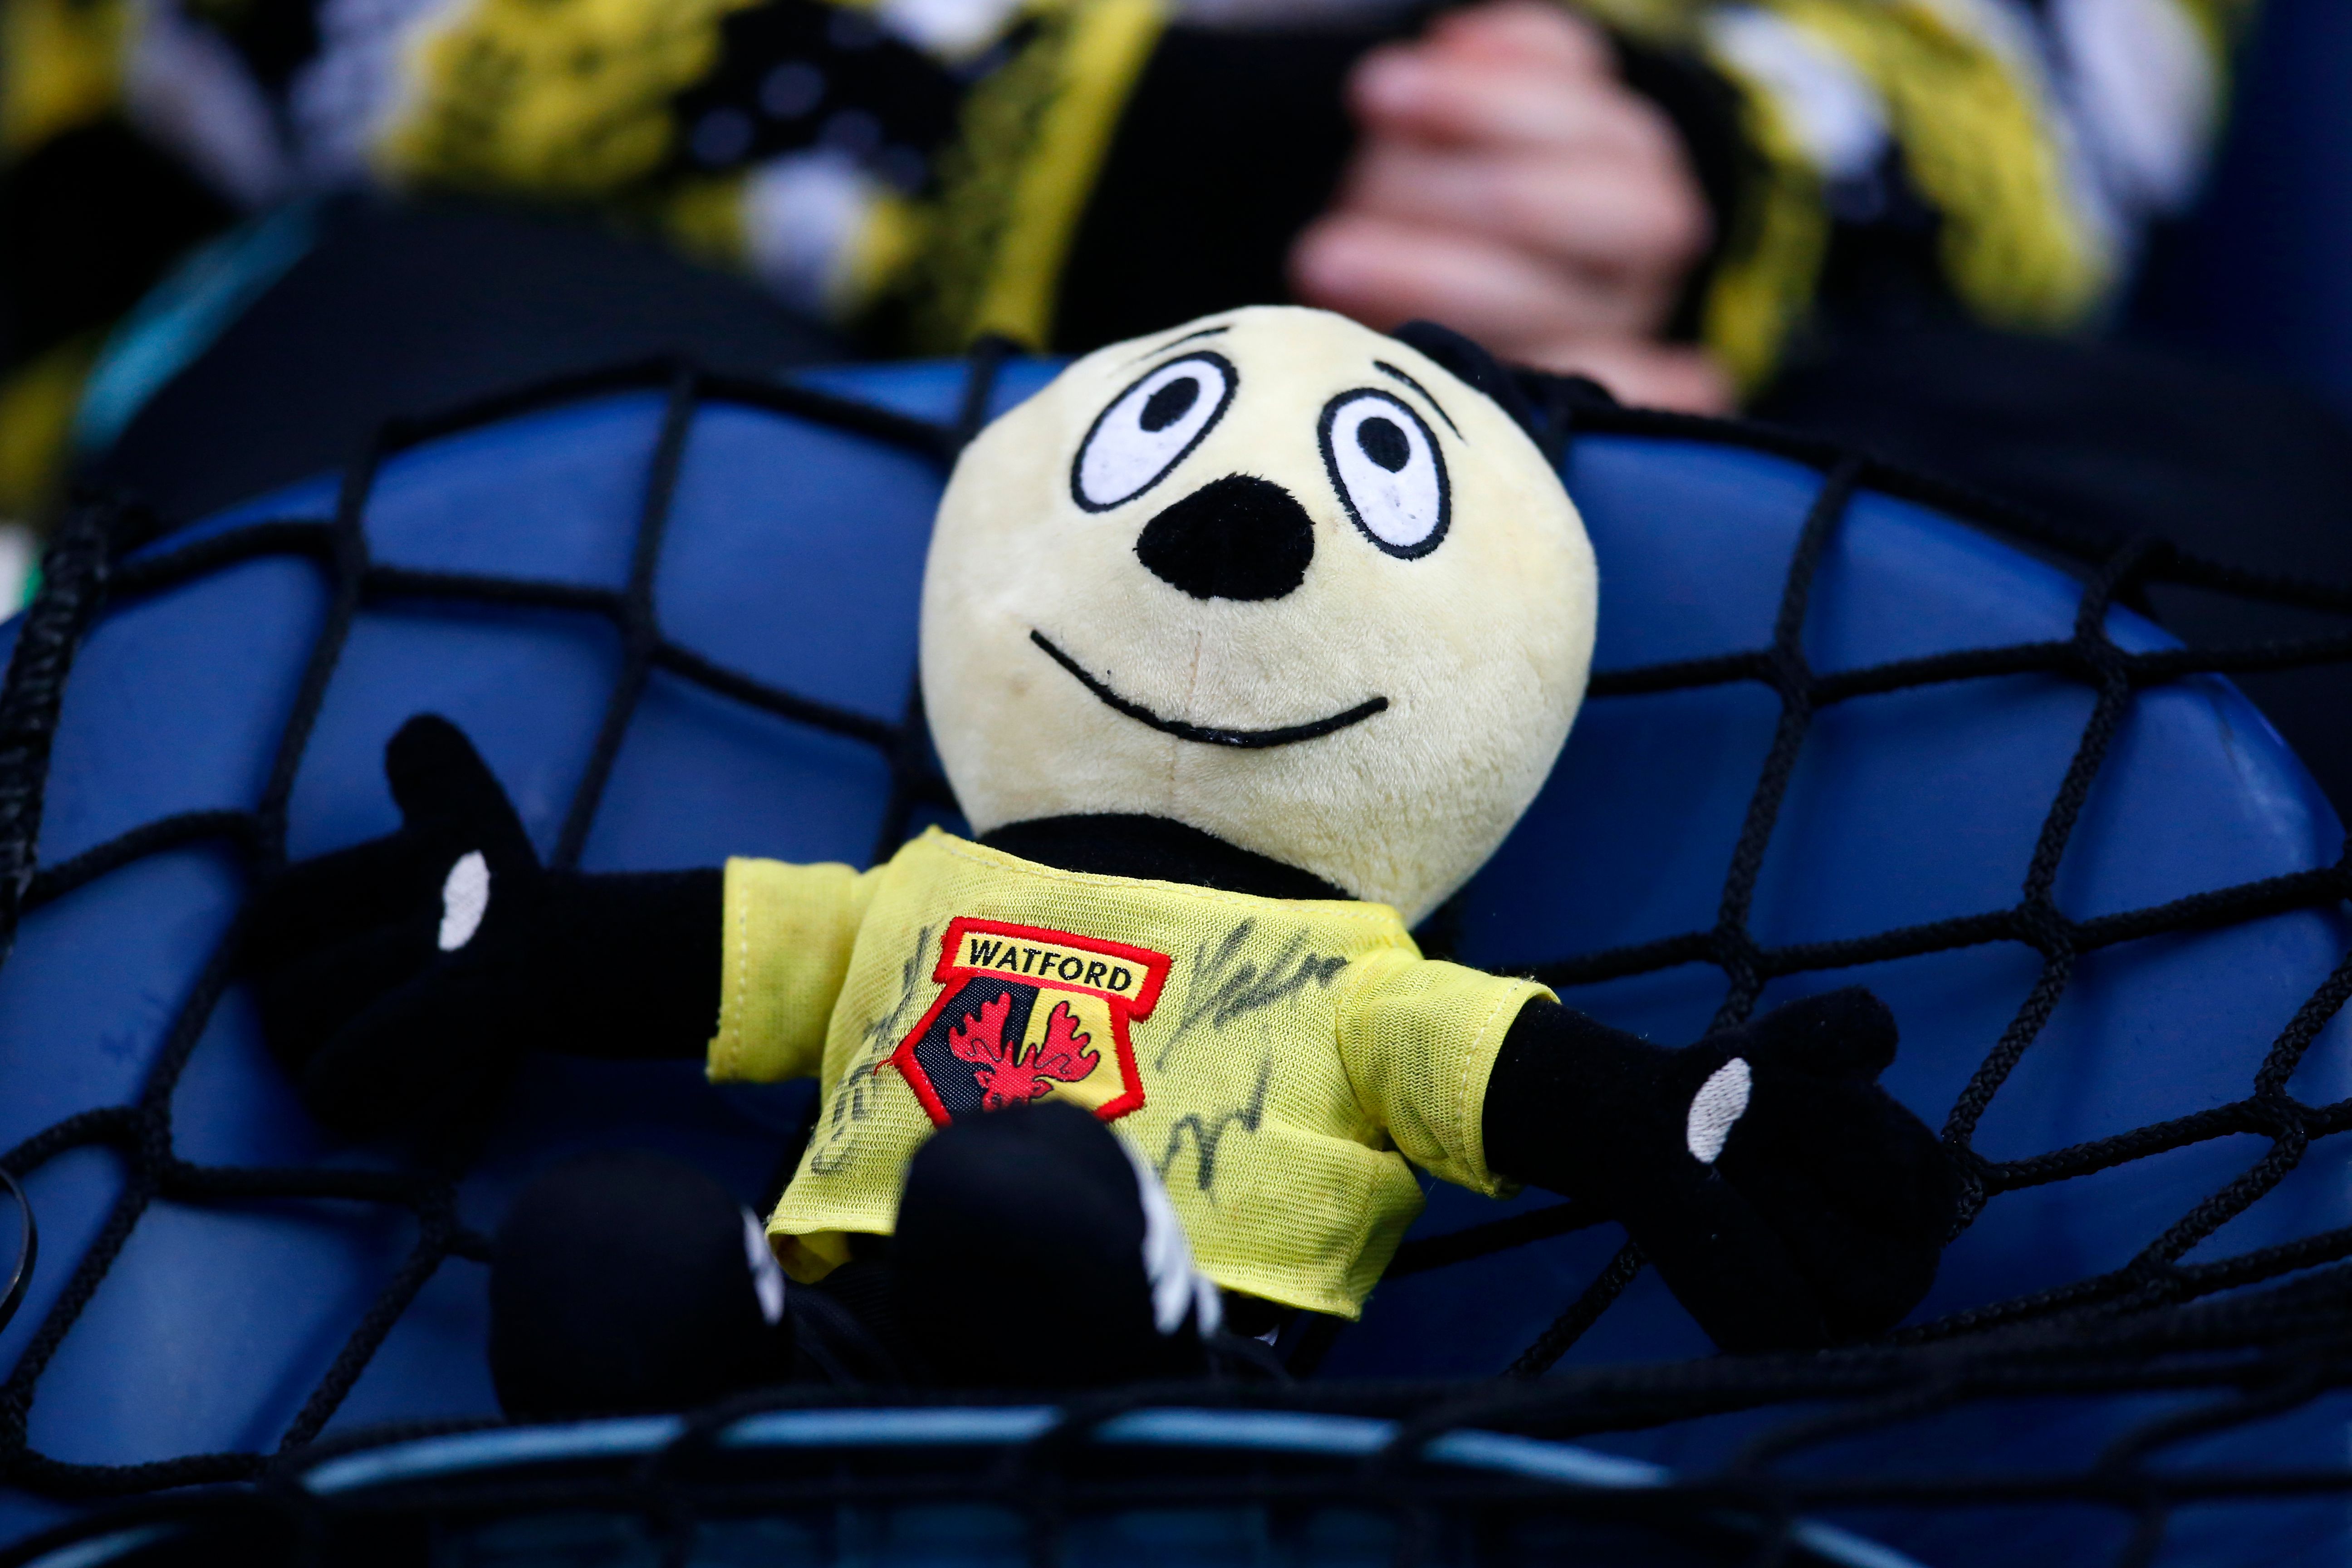 A cuddly toy of Harry the Hornet (Watford's mascot)